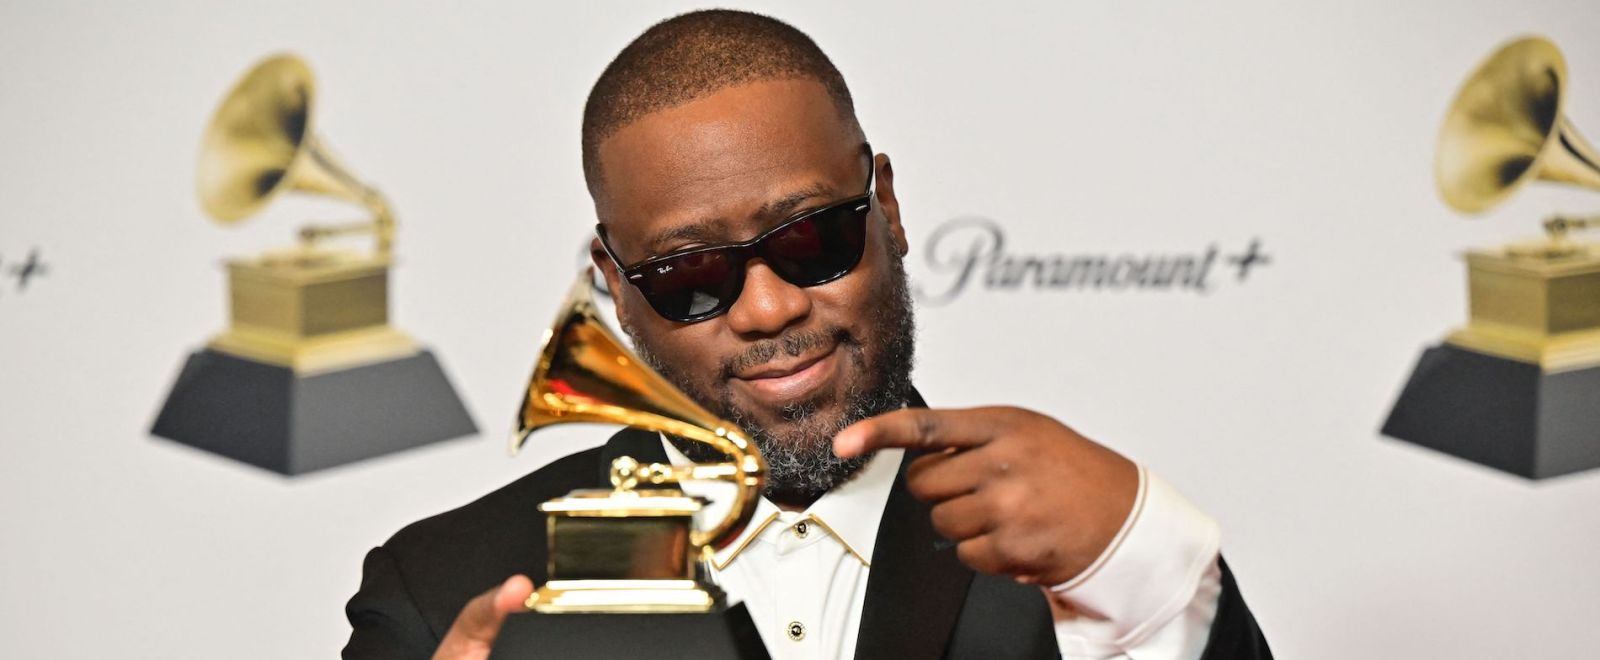 Robert Glasper Acknowledged Chris Brown Mad After Grammys 2023